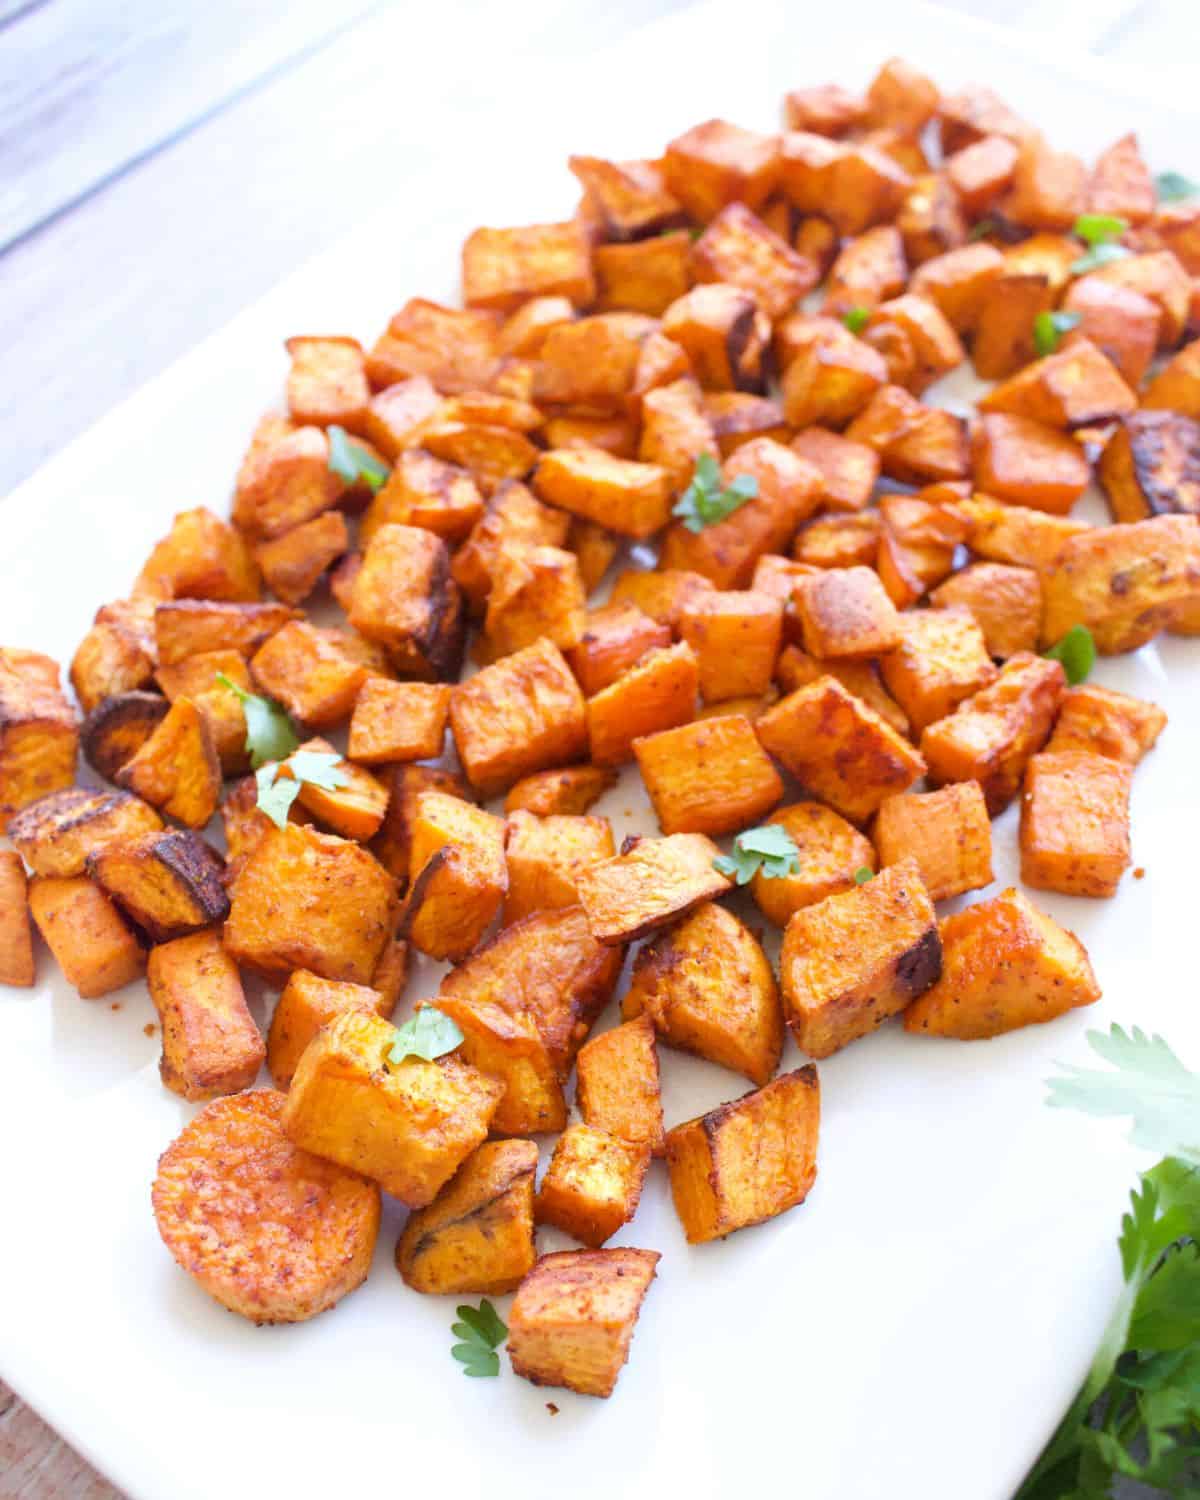 Roasted Mexican Sweet Potatoes are crisp on the outside and tender on the inside. Sure to be everyone’s favorite side dish for dinner or holidays!